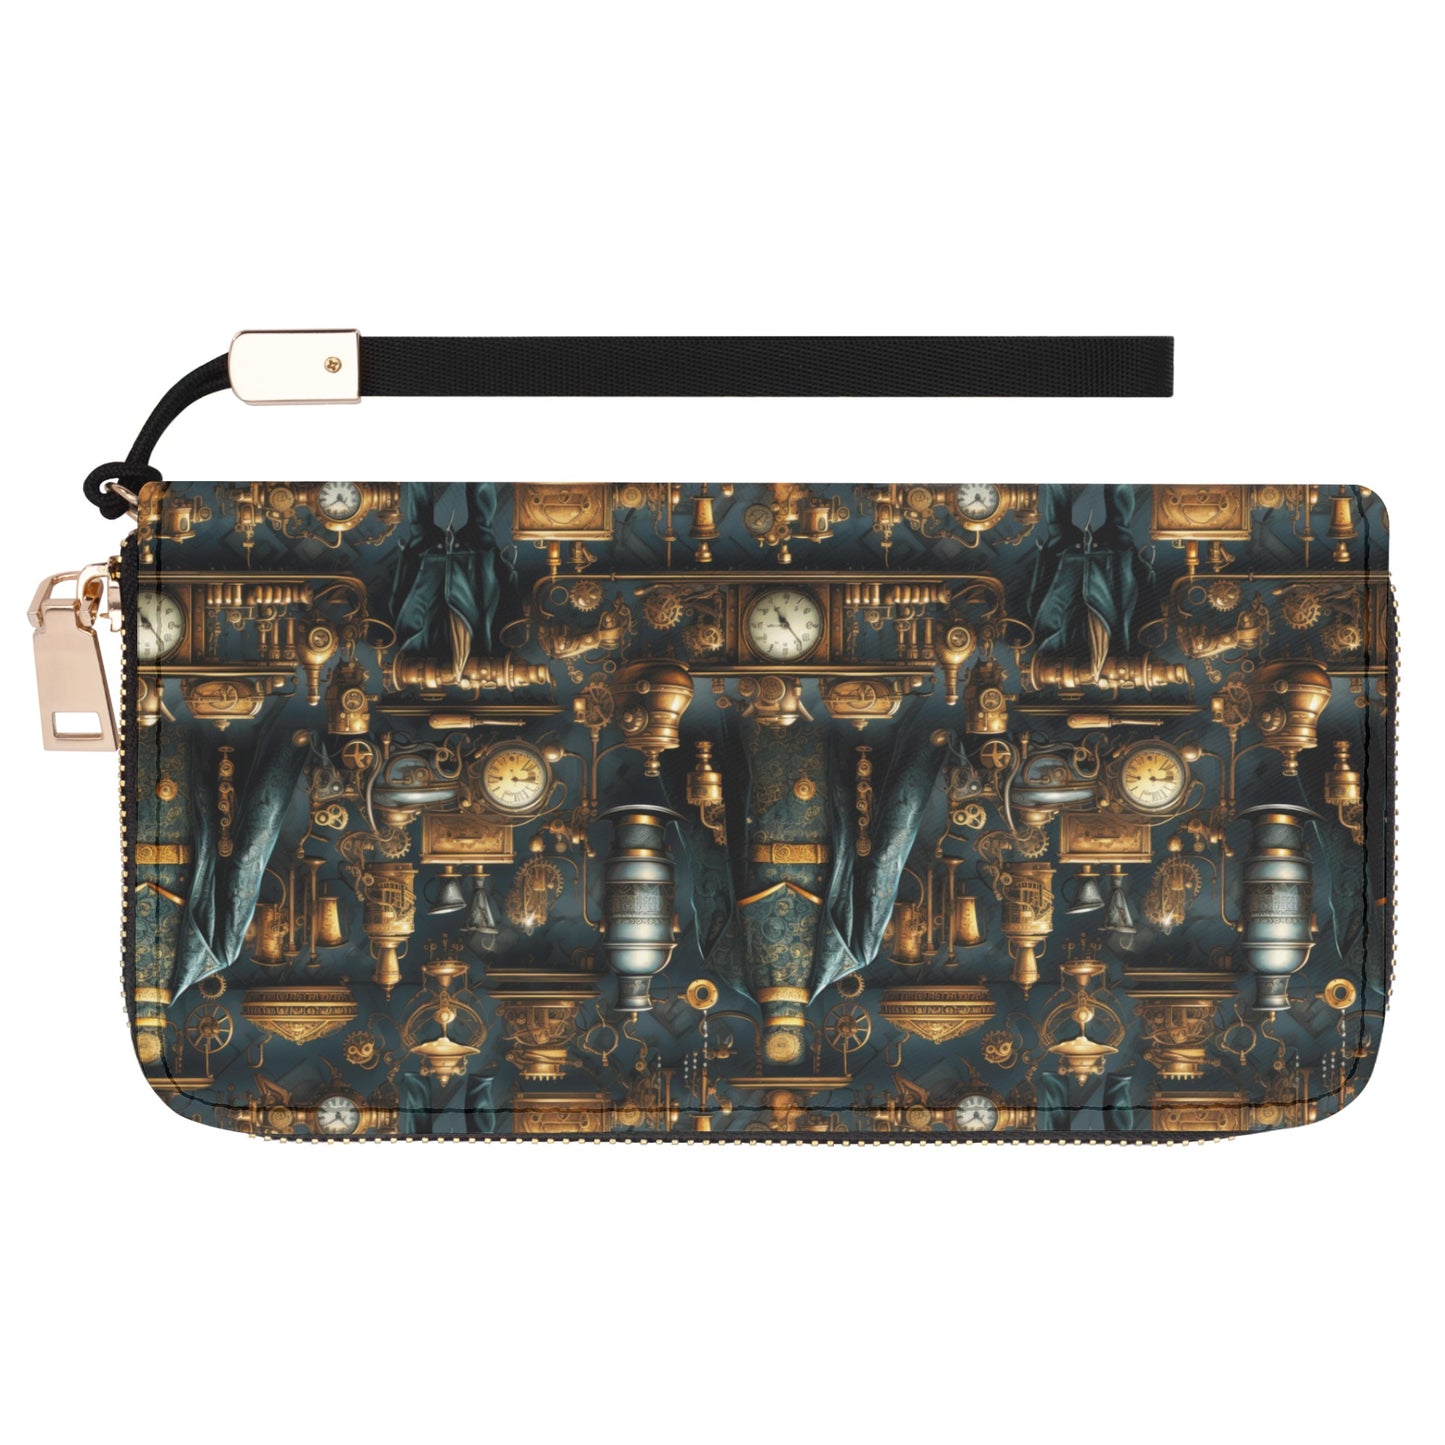 Steampunk Victorian Design with Gears and Mechanical Elements - Wristlet Wallet Leather (PU)